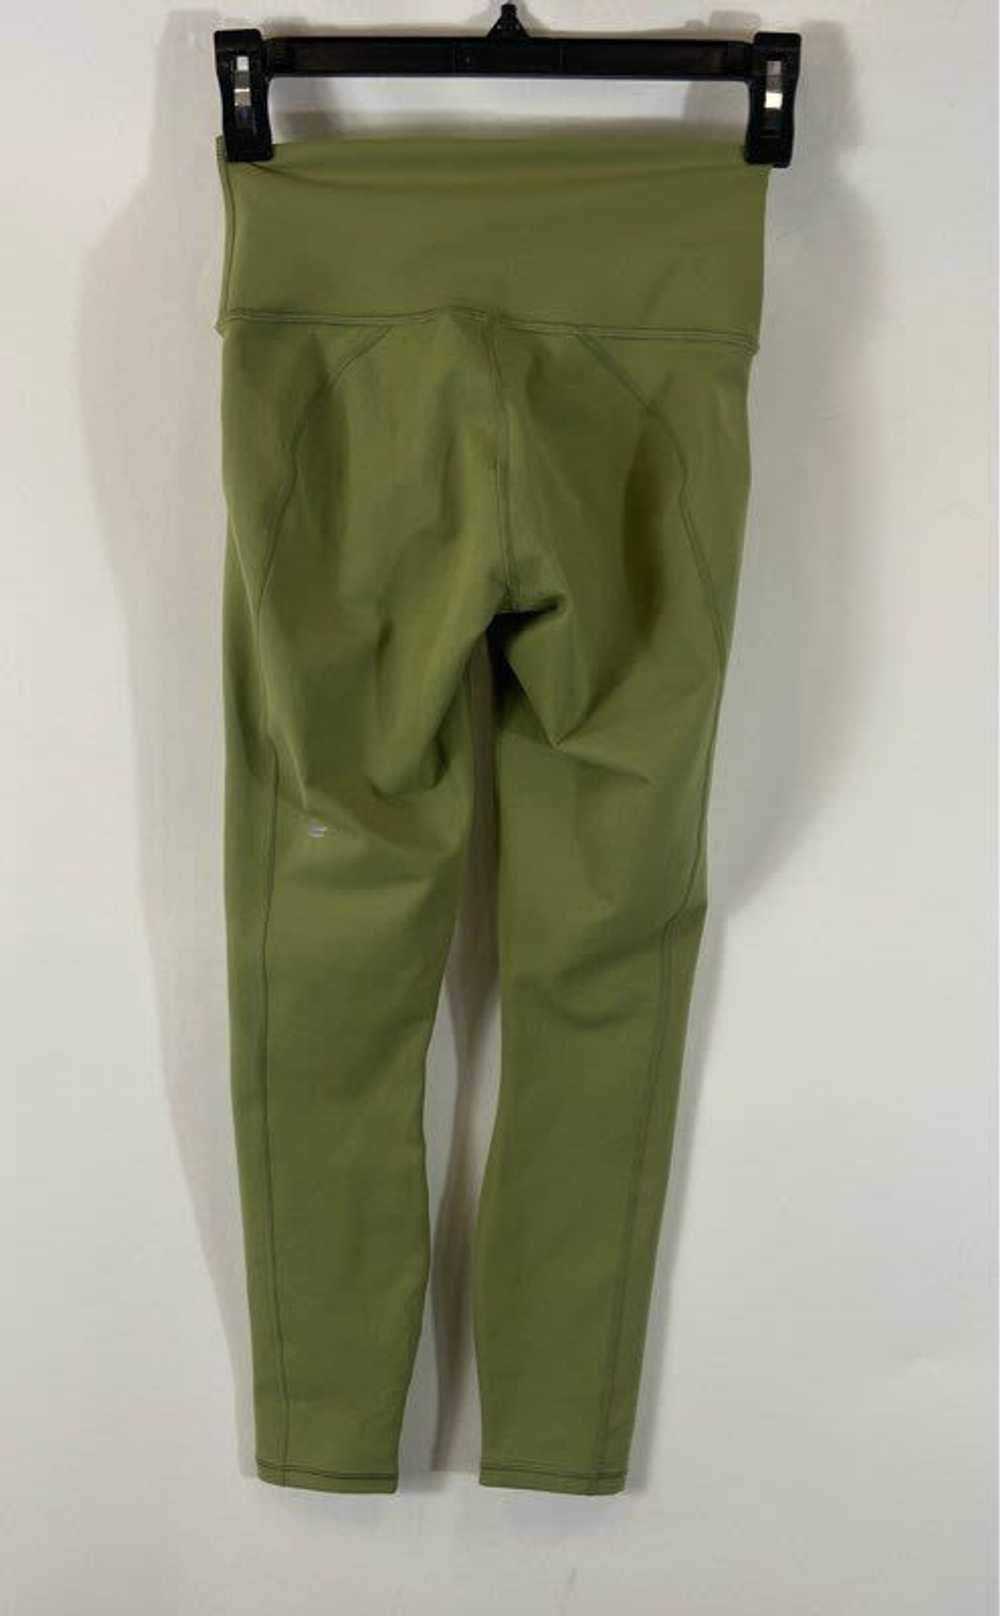 Fabletics Green Pants - Size X Small NWT - image 2